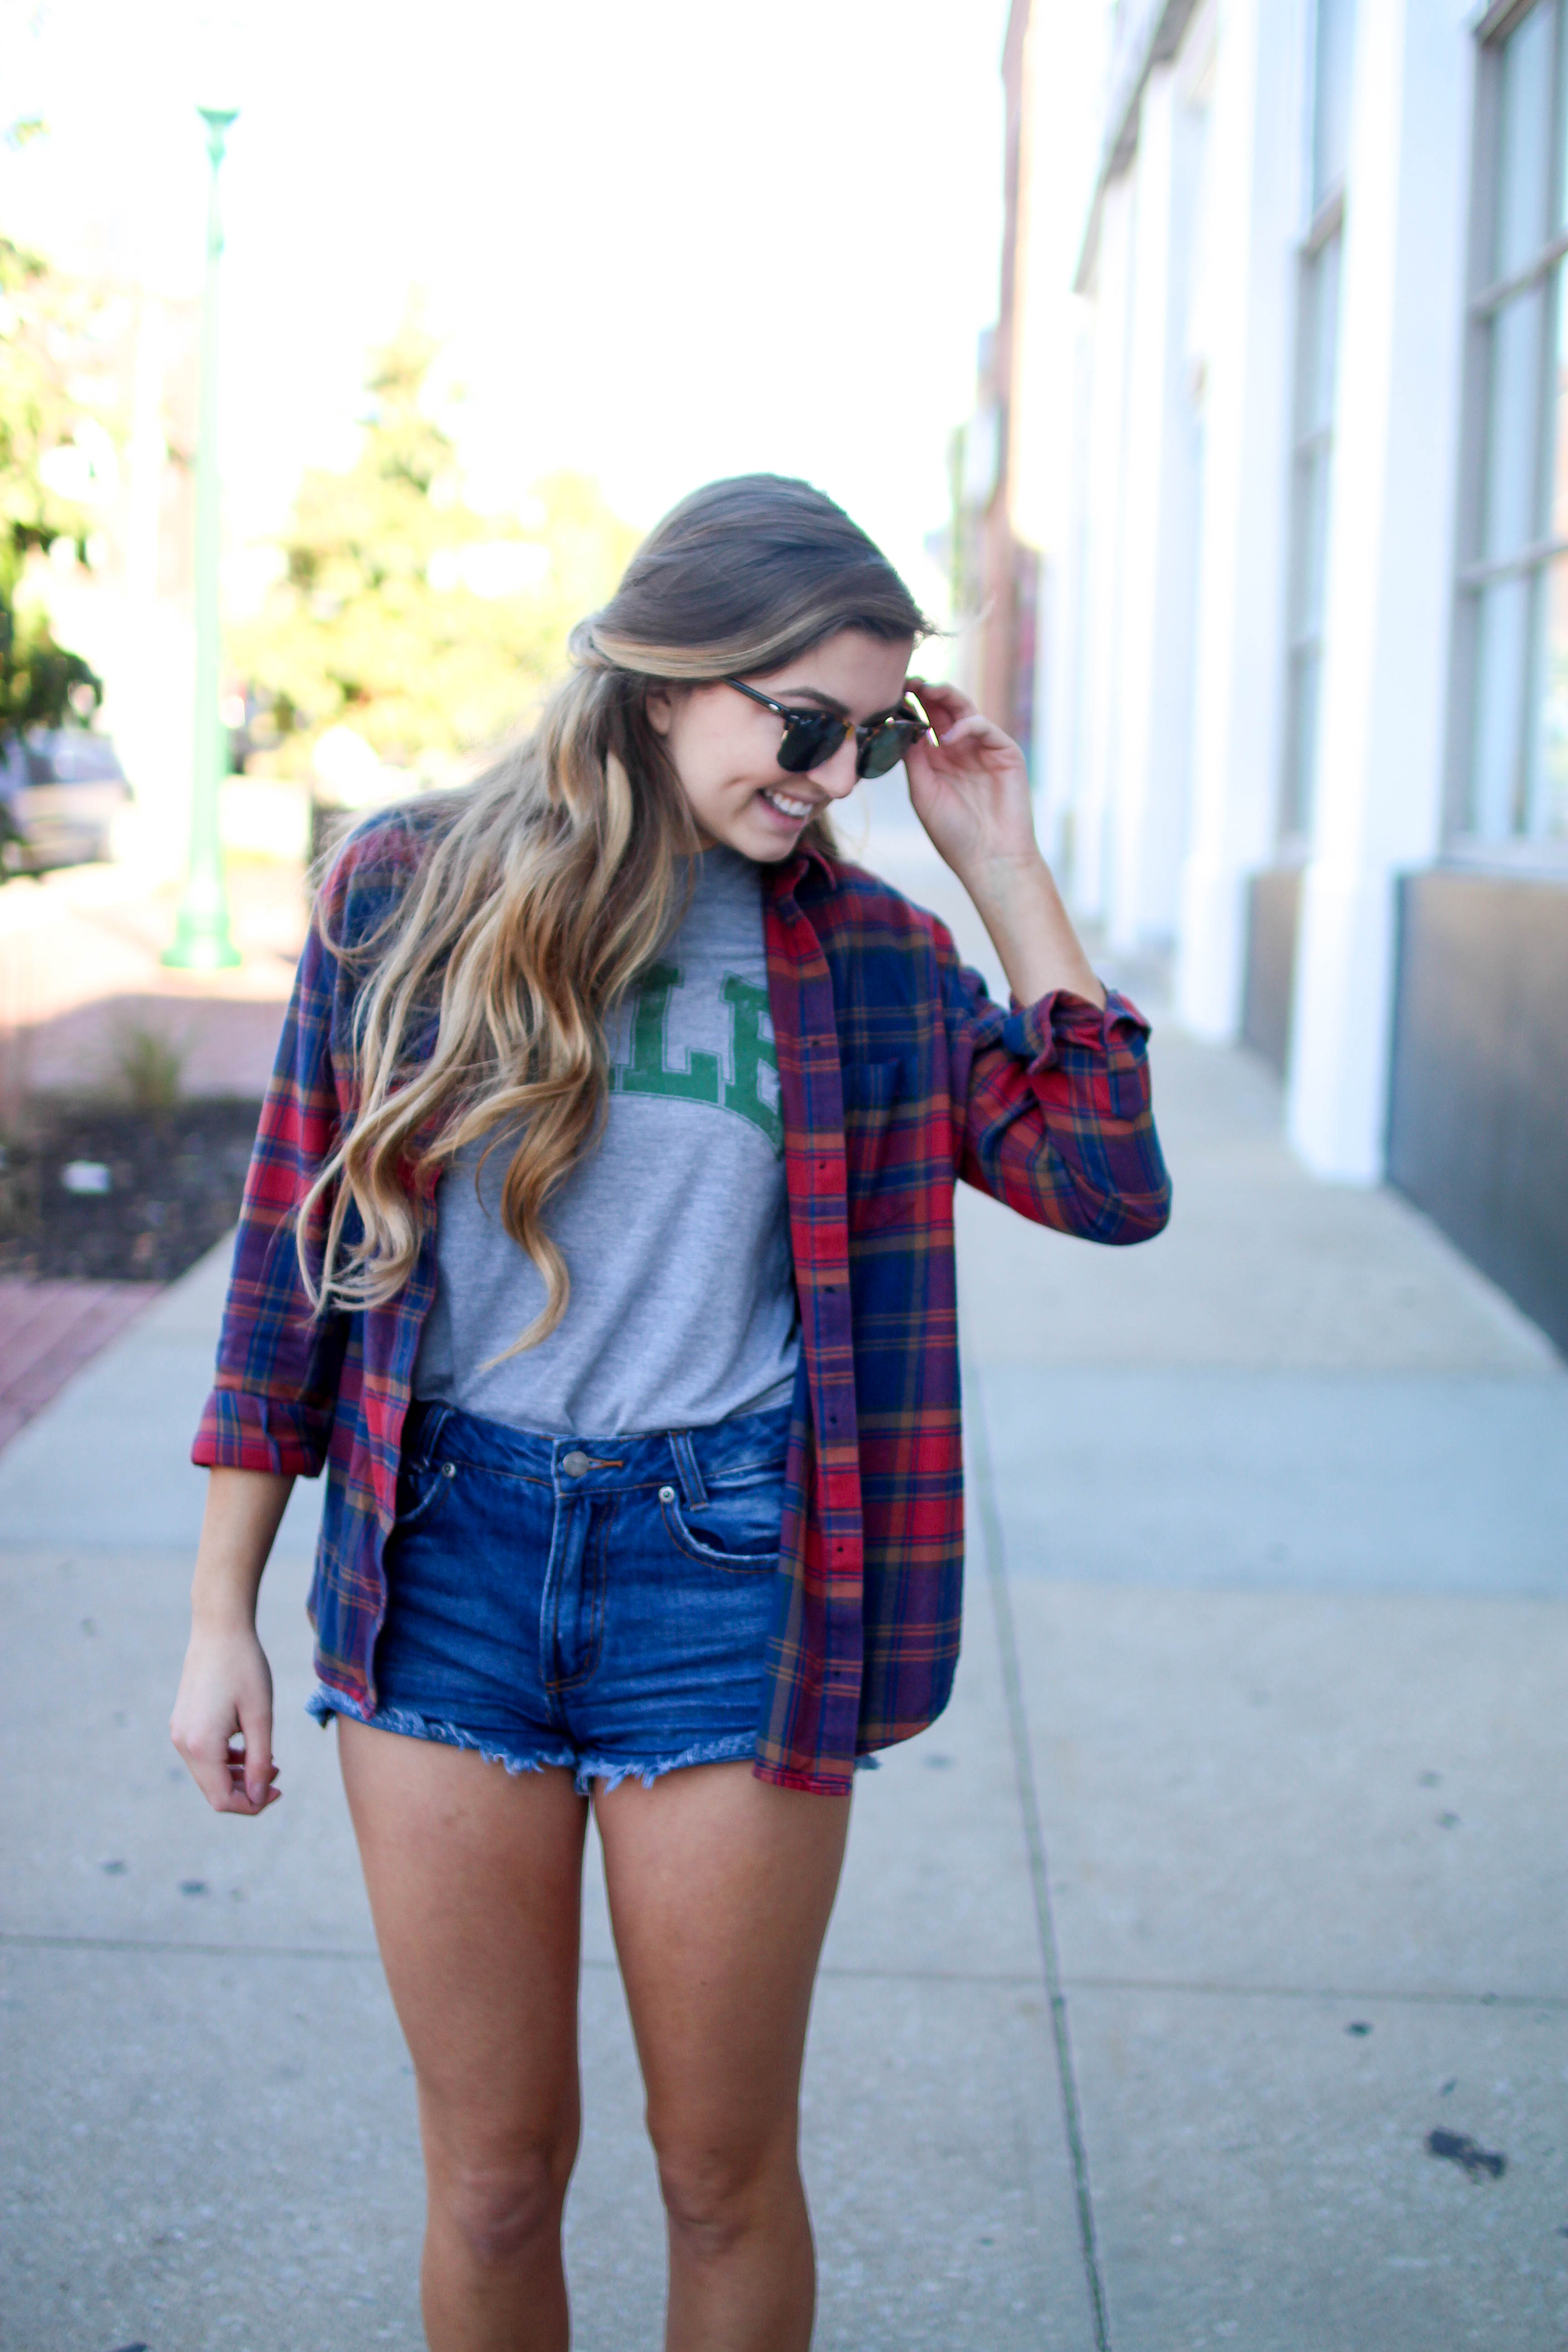 How to style flannel shirts, kale shirt on the blog daily dose of charm dailydoseofcharm.com by lauren lindmark